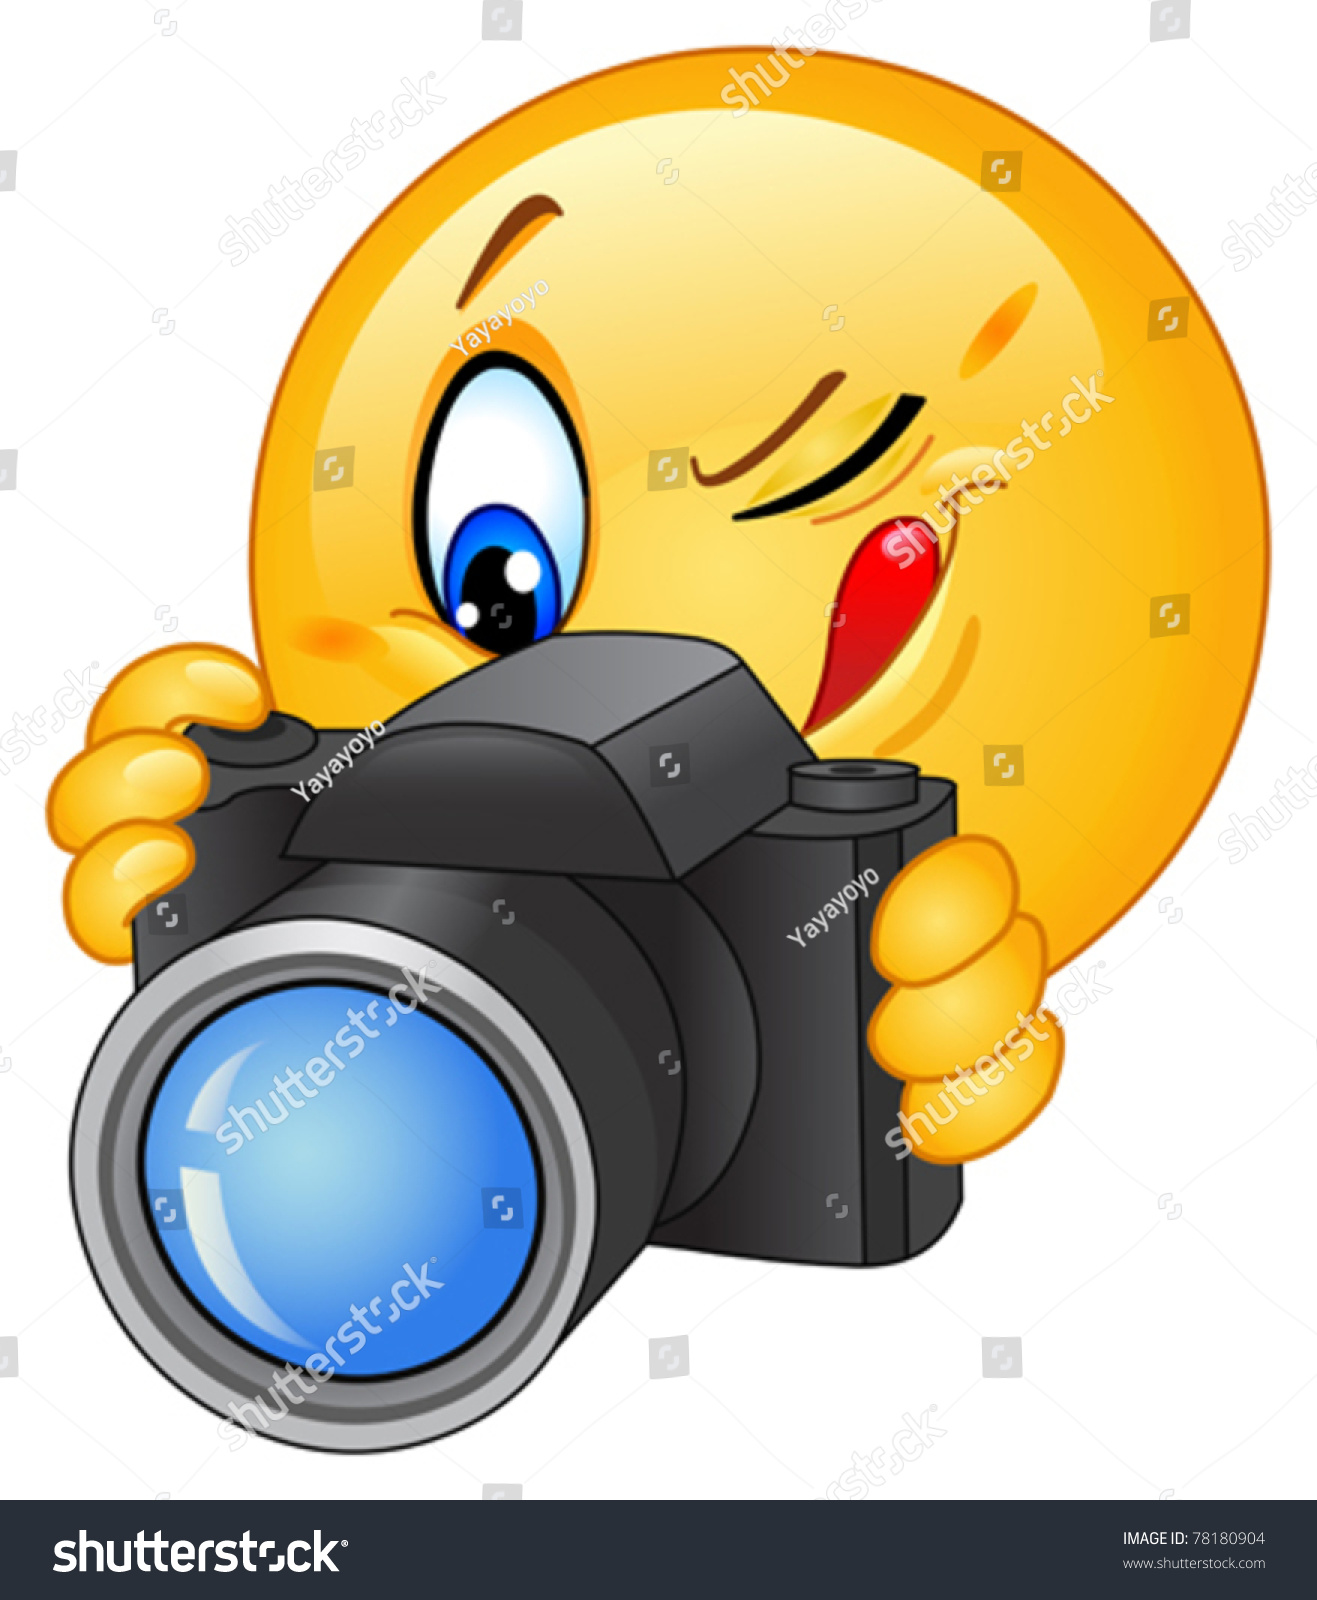 Download Emoticon Taking Photo Stock Vector 78180904 - Shutterstock